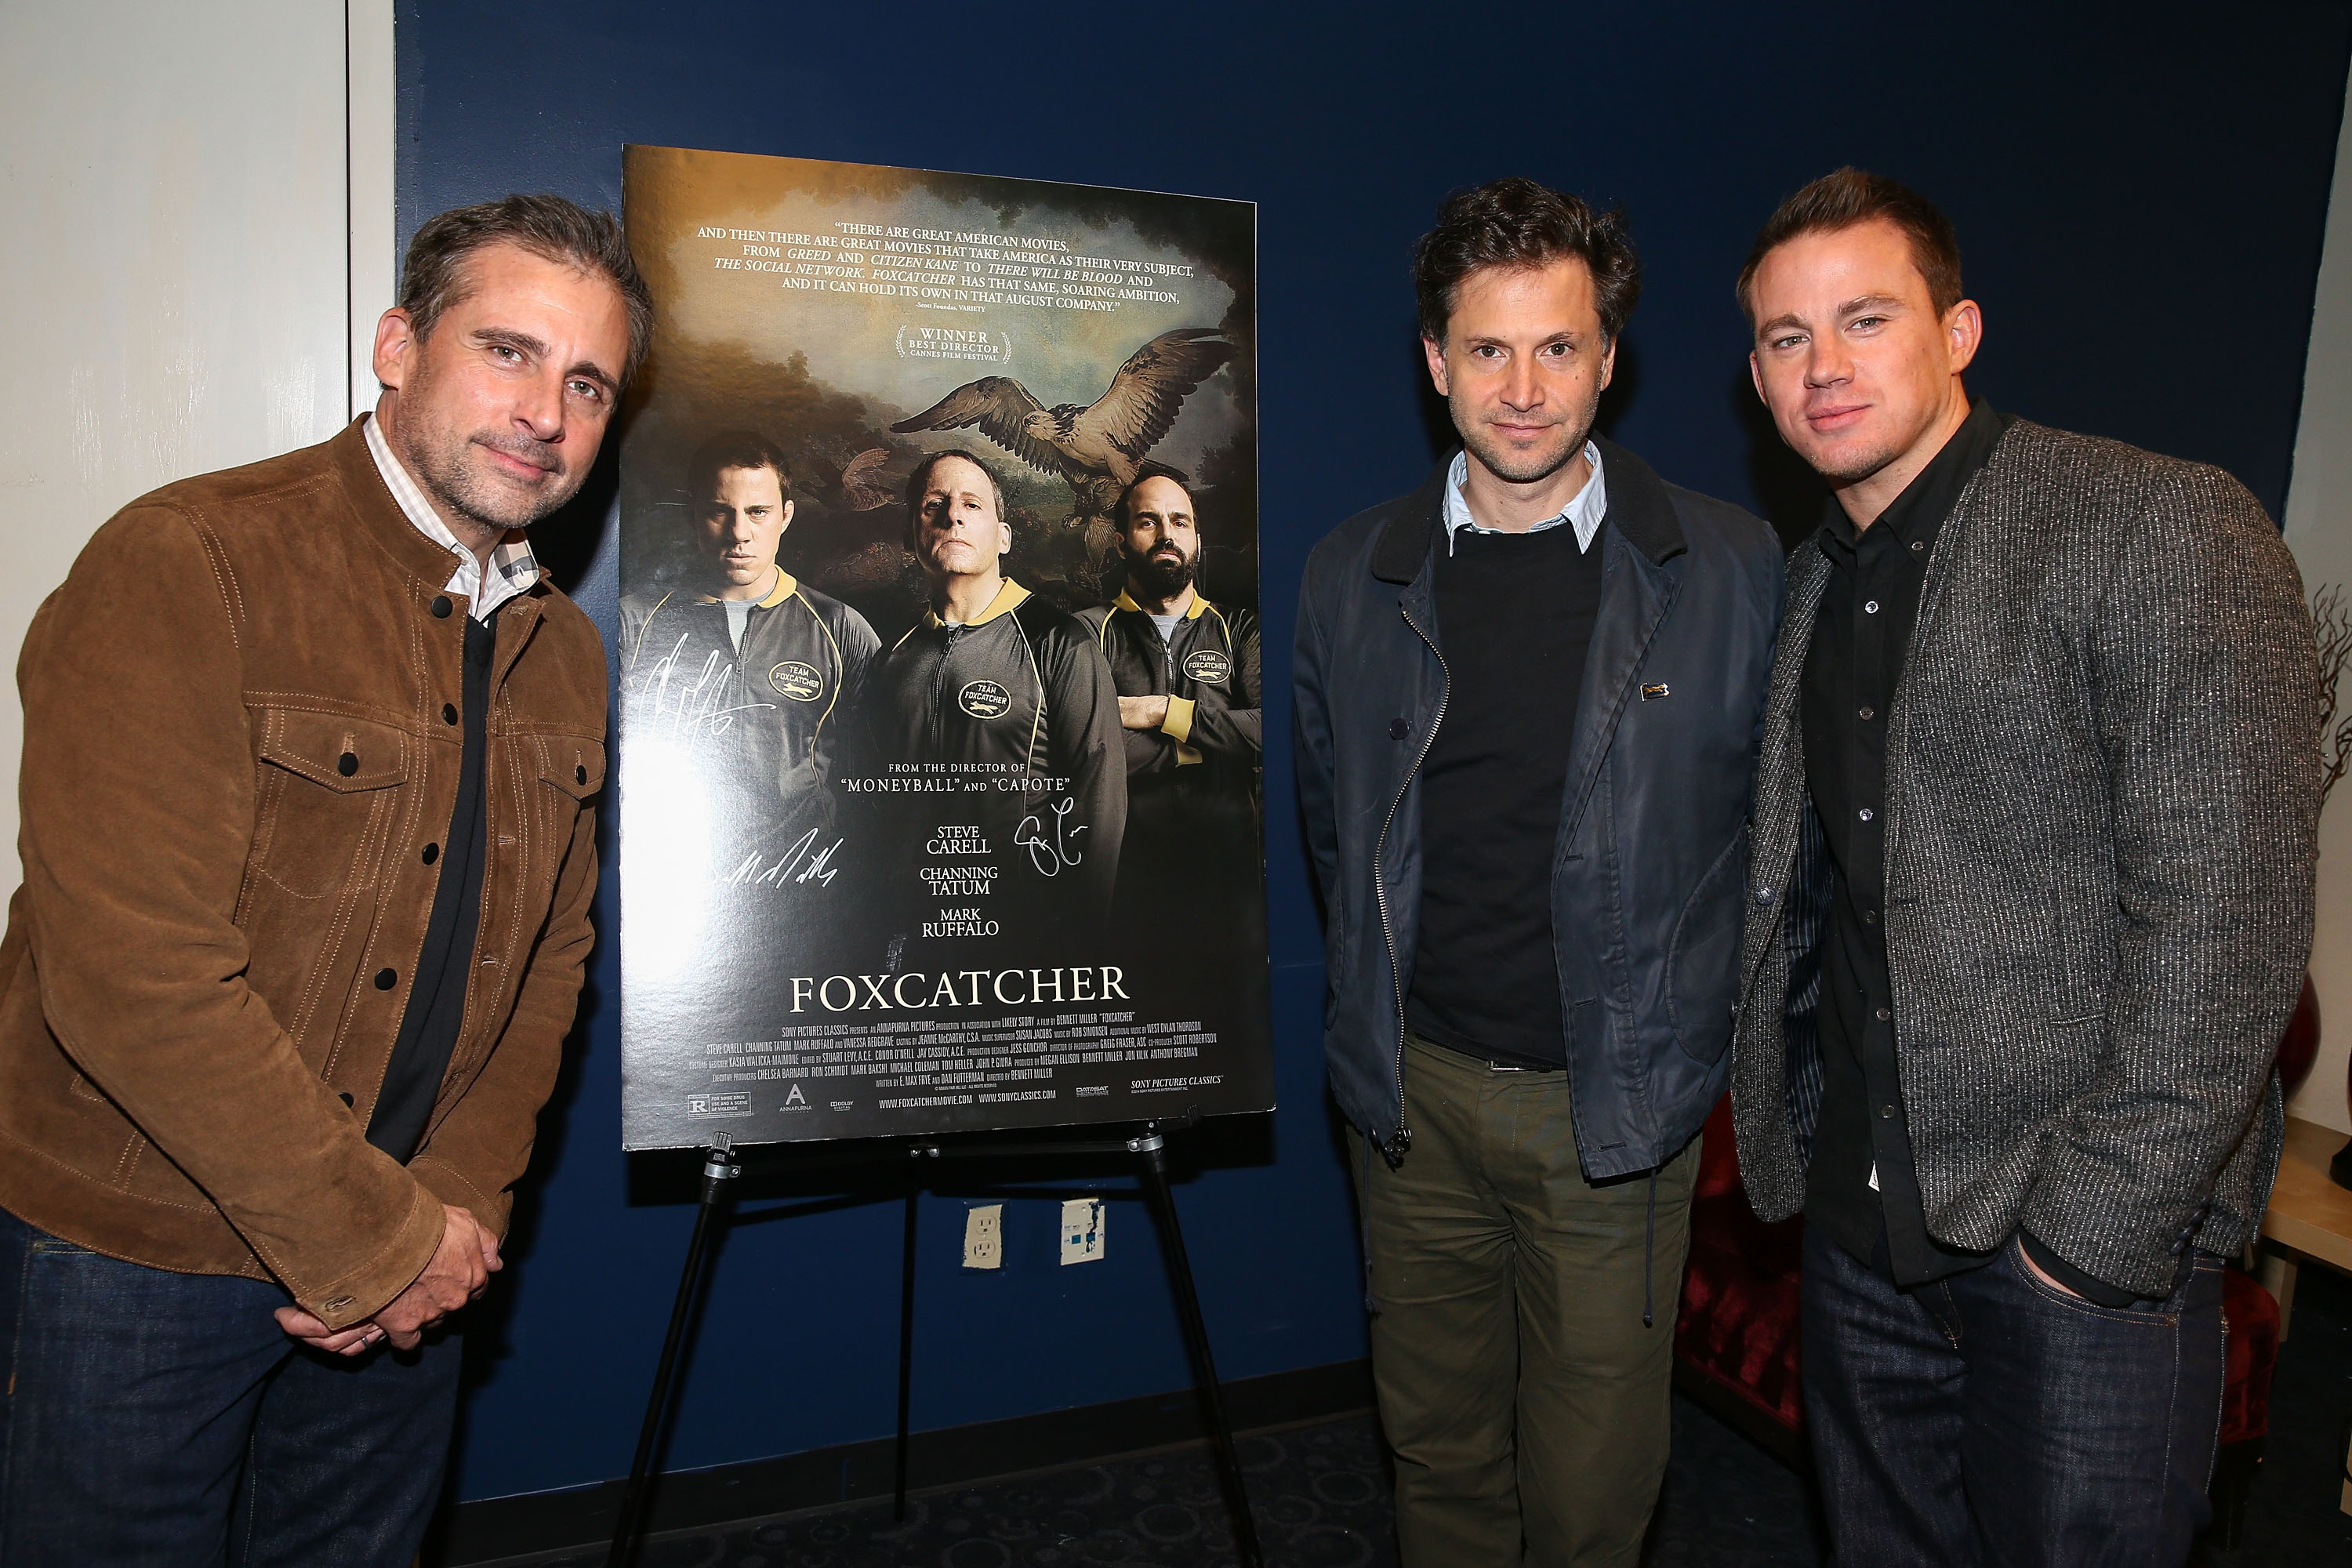 From left: Actor Steve Carell, director Bennett Miller, and actor Channing Tatum attend the screening of 'Foxcatcher' on Nov. 19, 2014 in Hollywood, California.